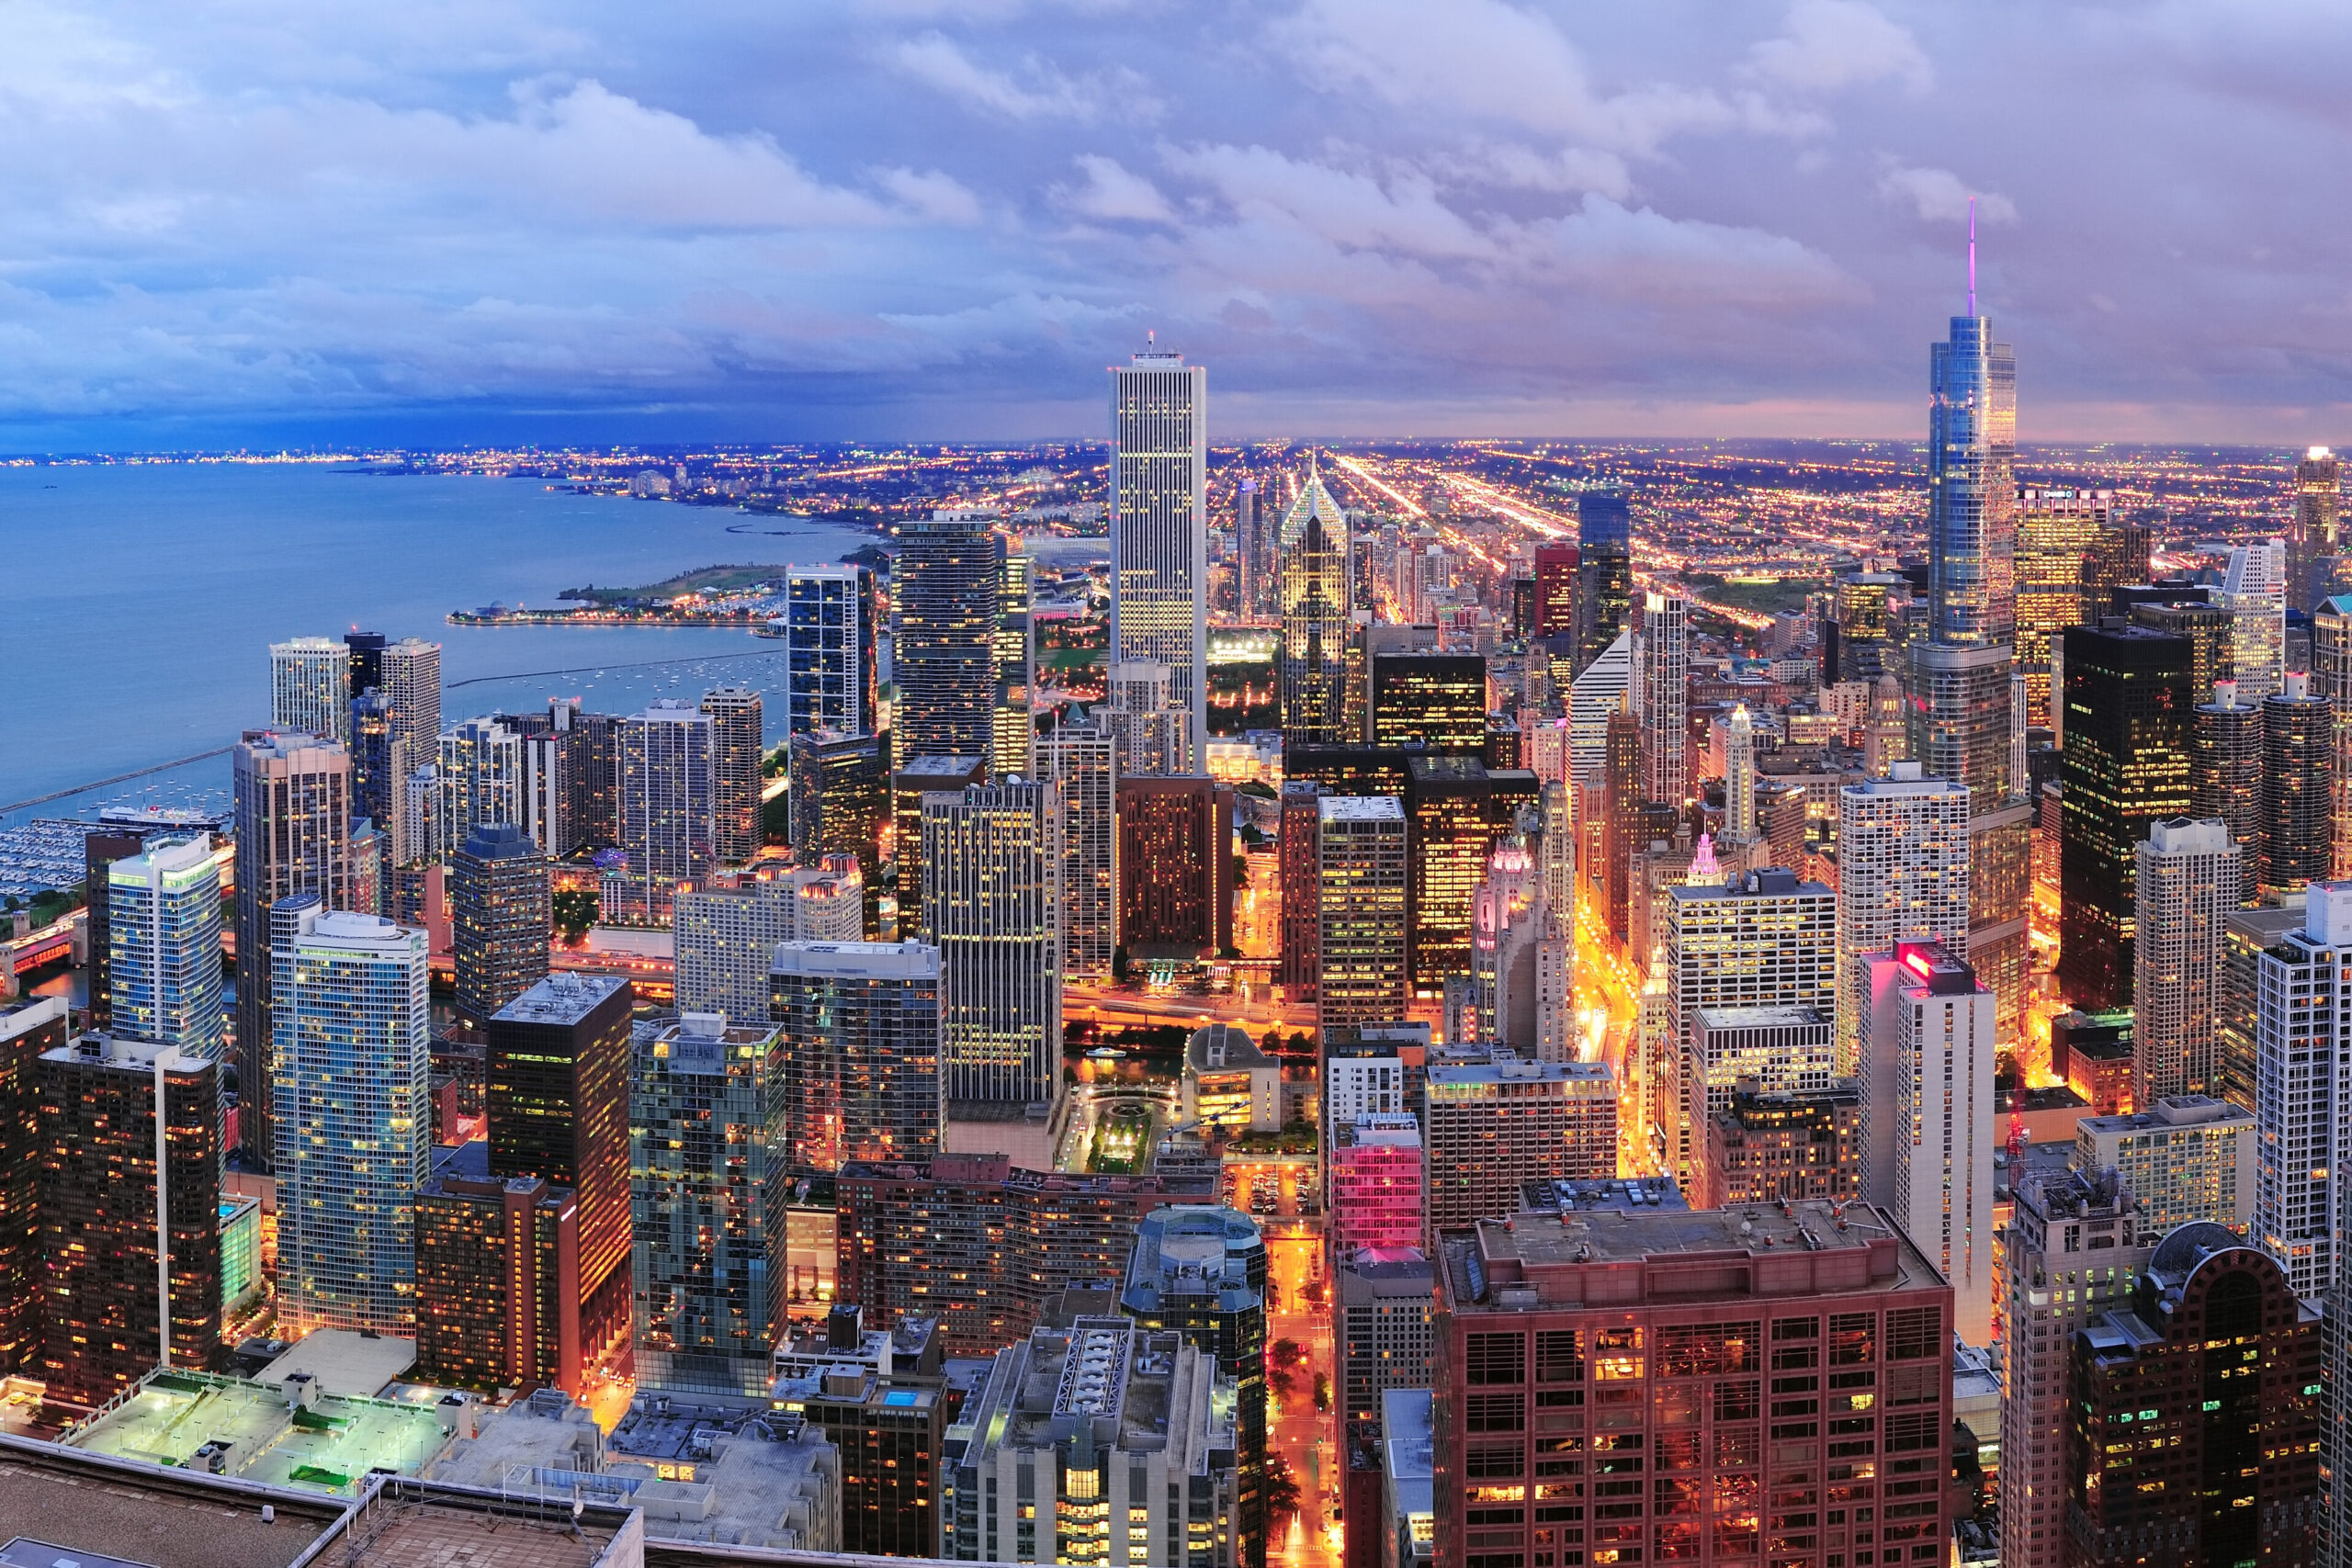 Aerial view of the skyline of Chicago, Illinois, United States at dusk